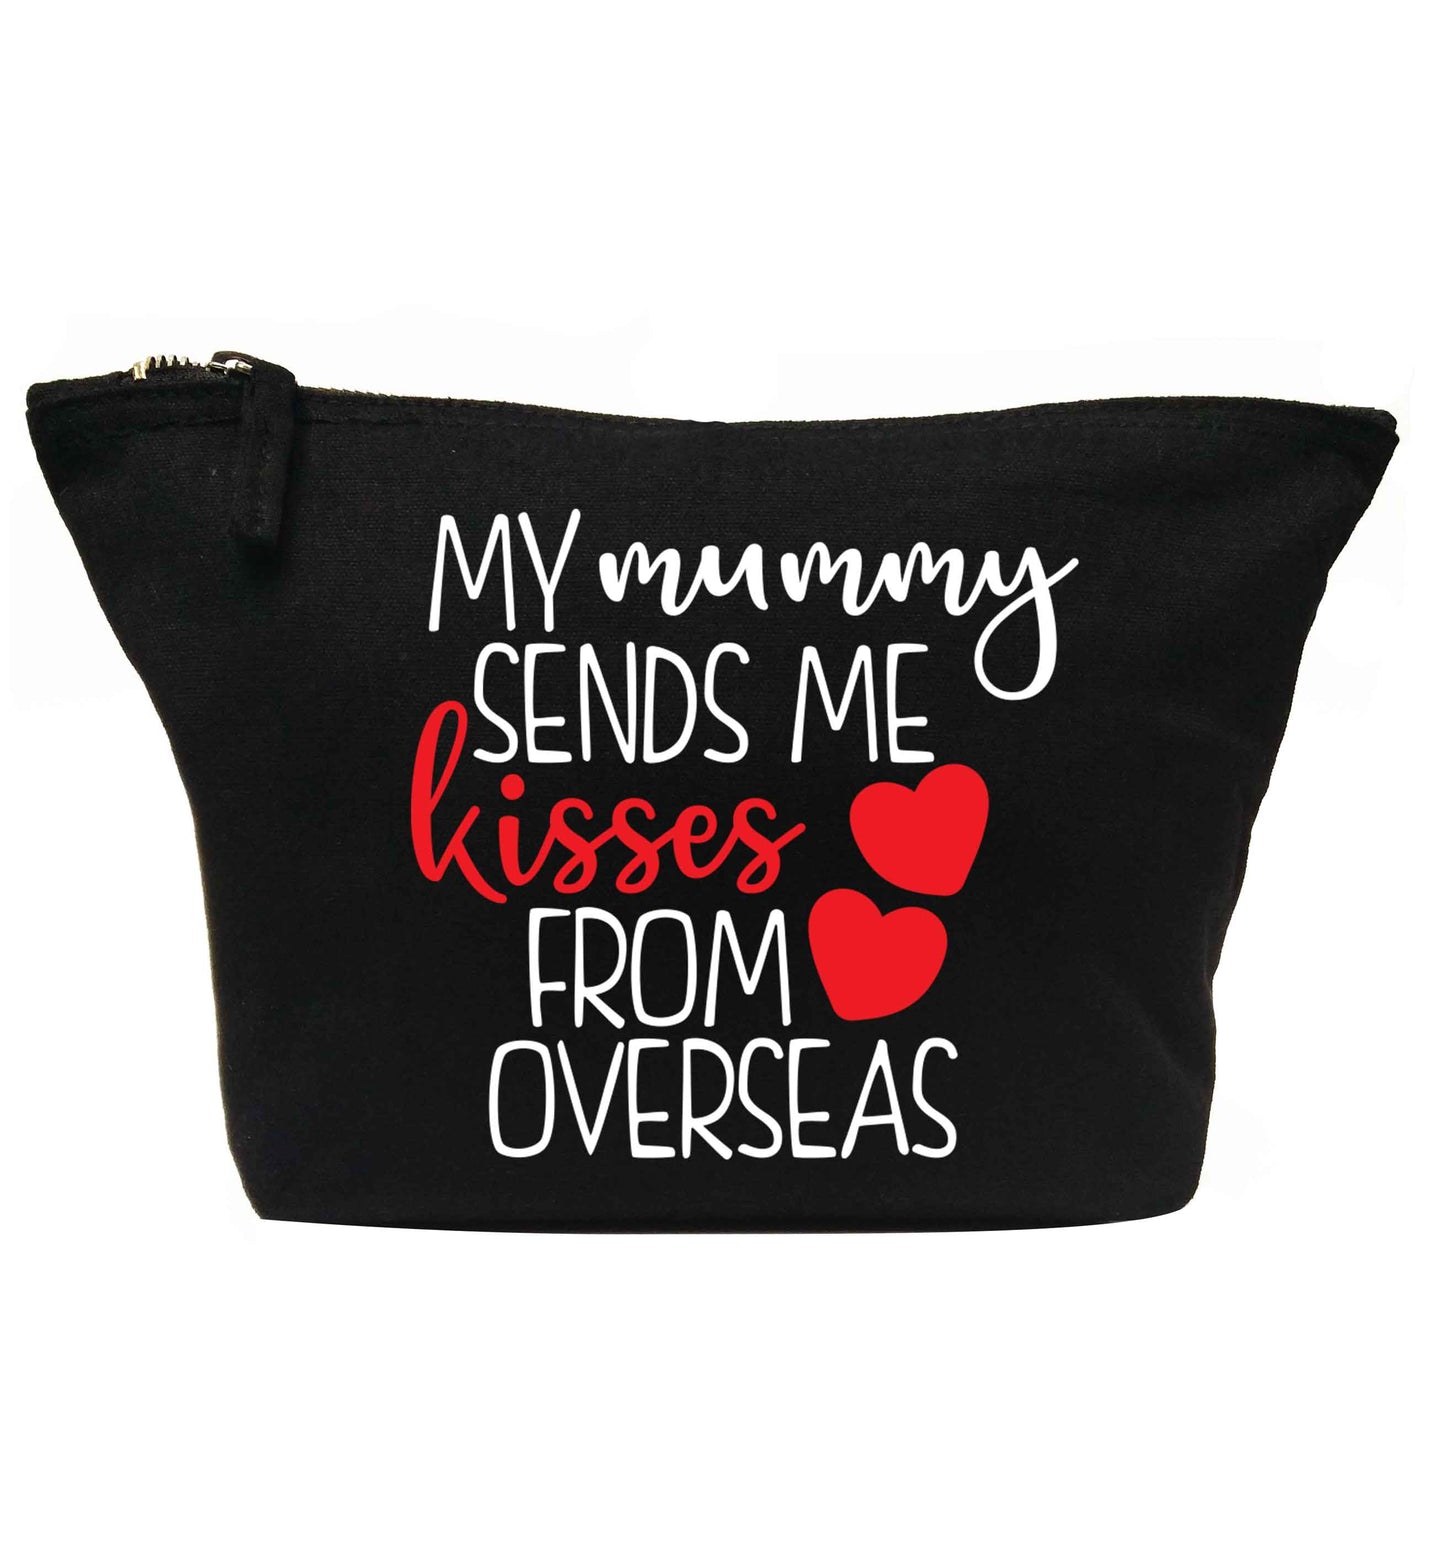 My mummy sends me kisses from overseas | Makeup / wash bag